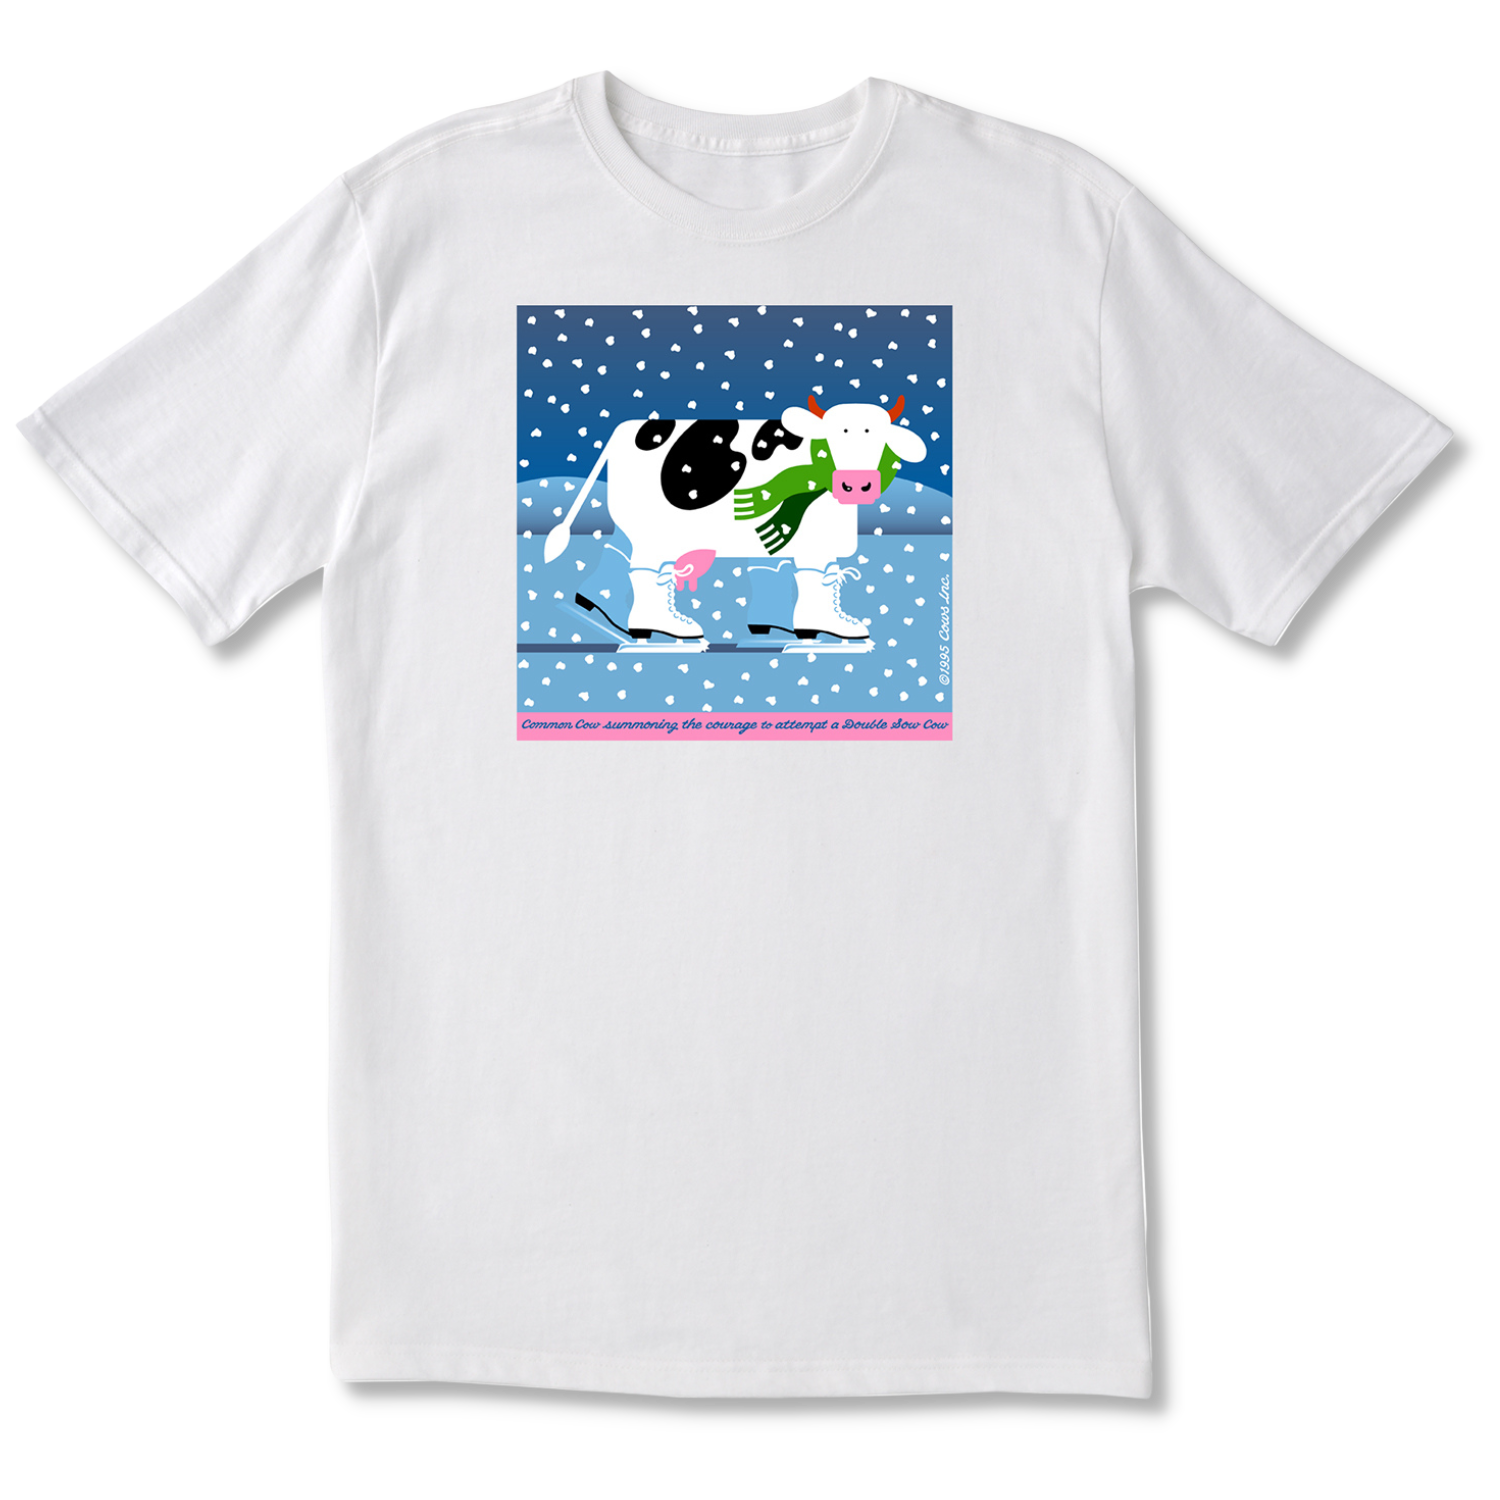 Skating COWS Classic T